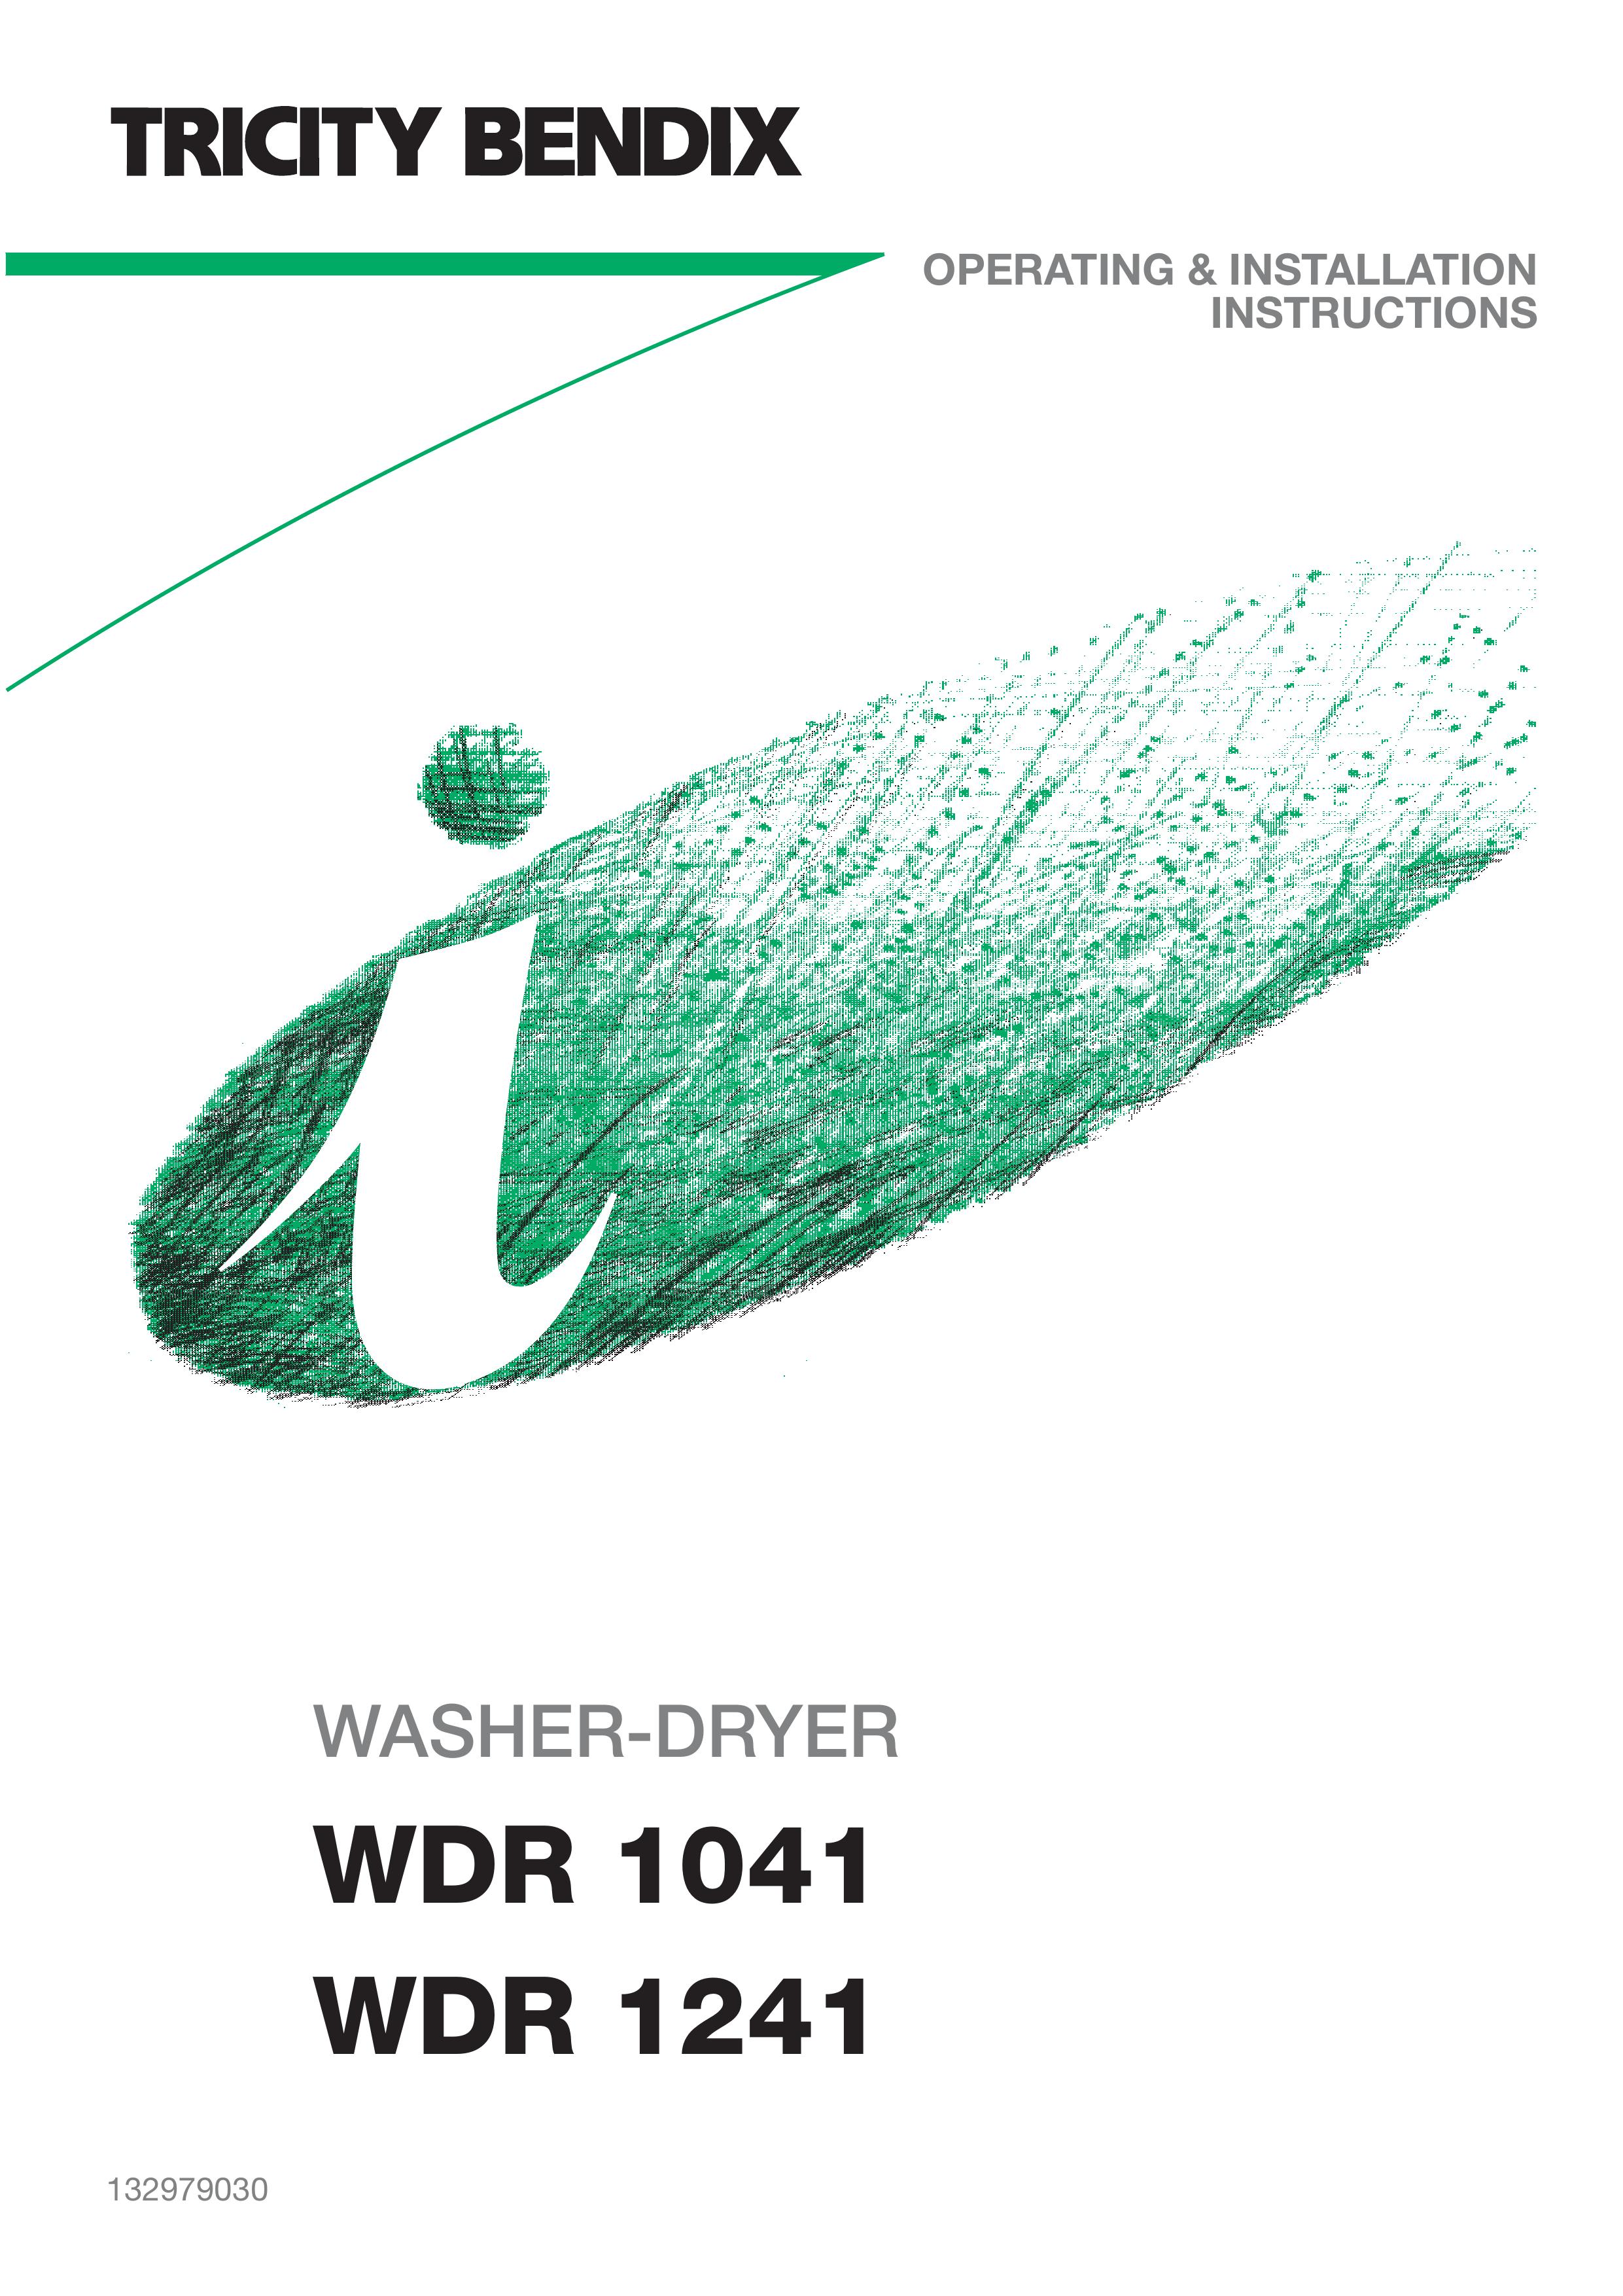 Tricity Bendix WDR 1241 Washer/Dryer User Manual